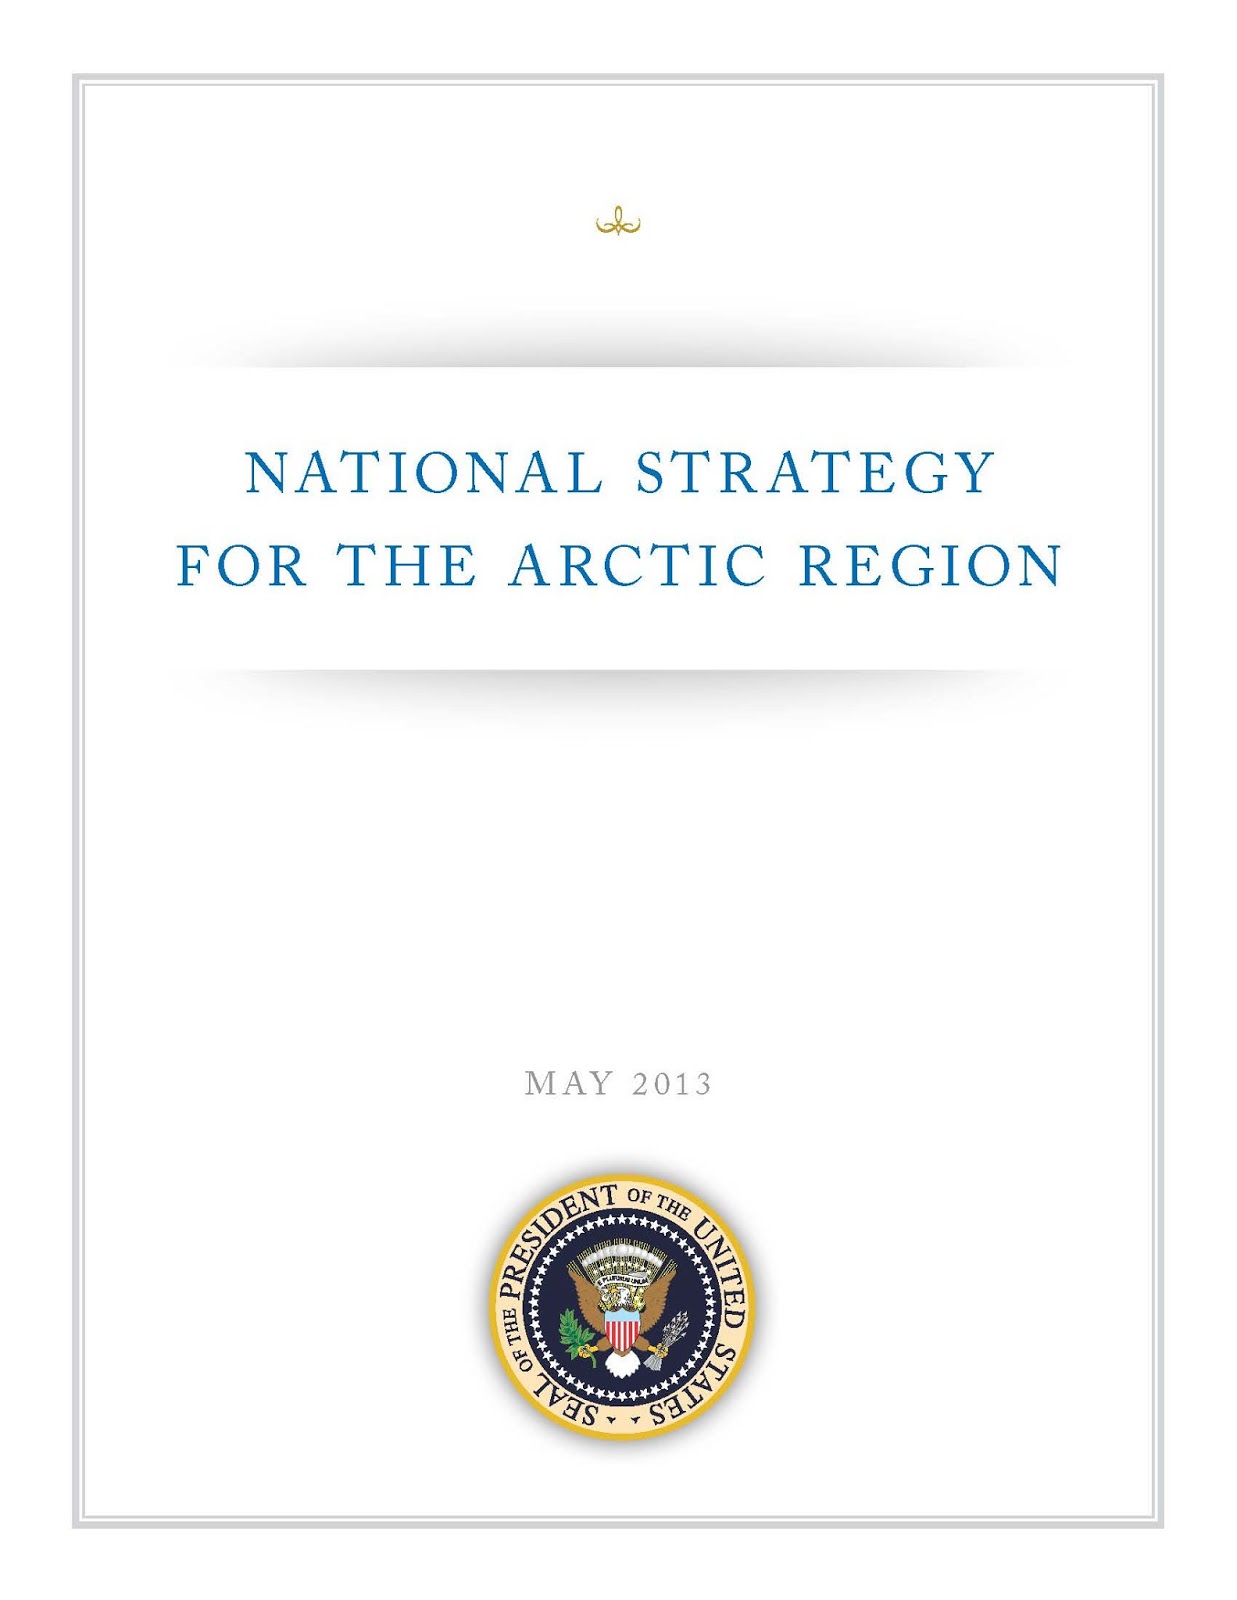 U.S. National Strategy for the Arctic Region